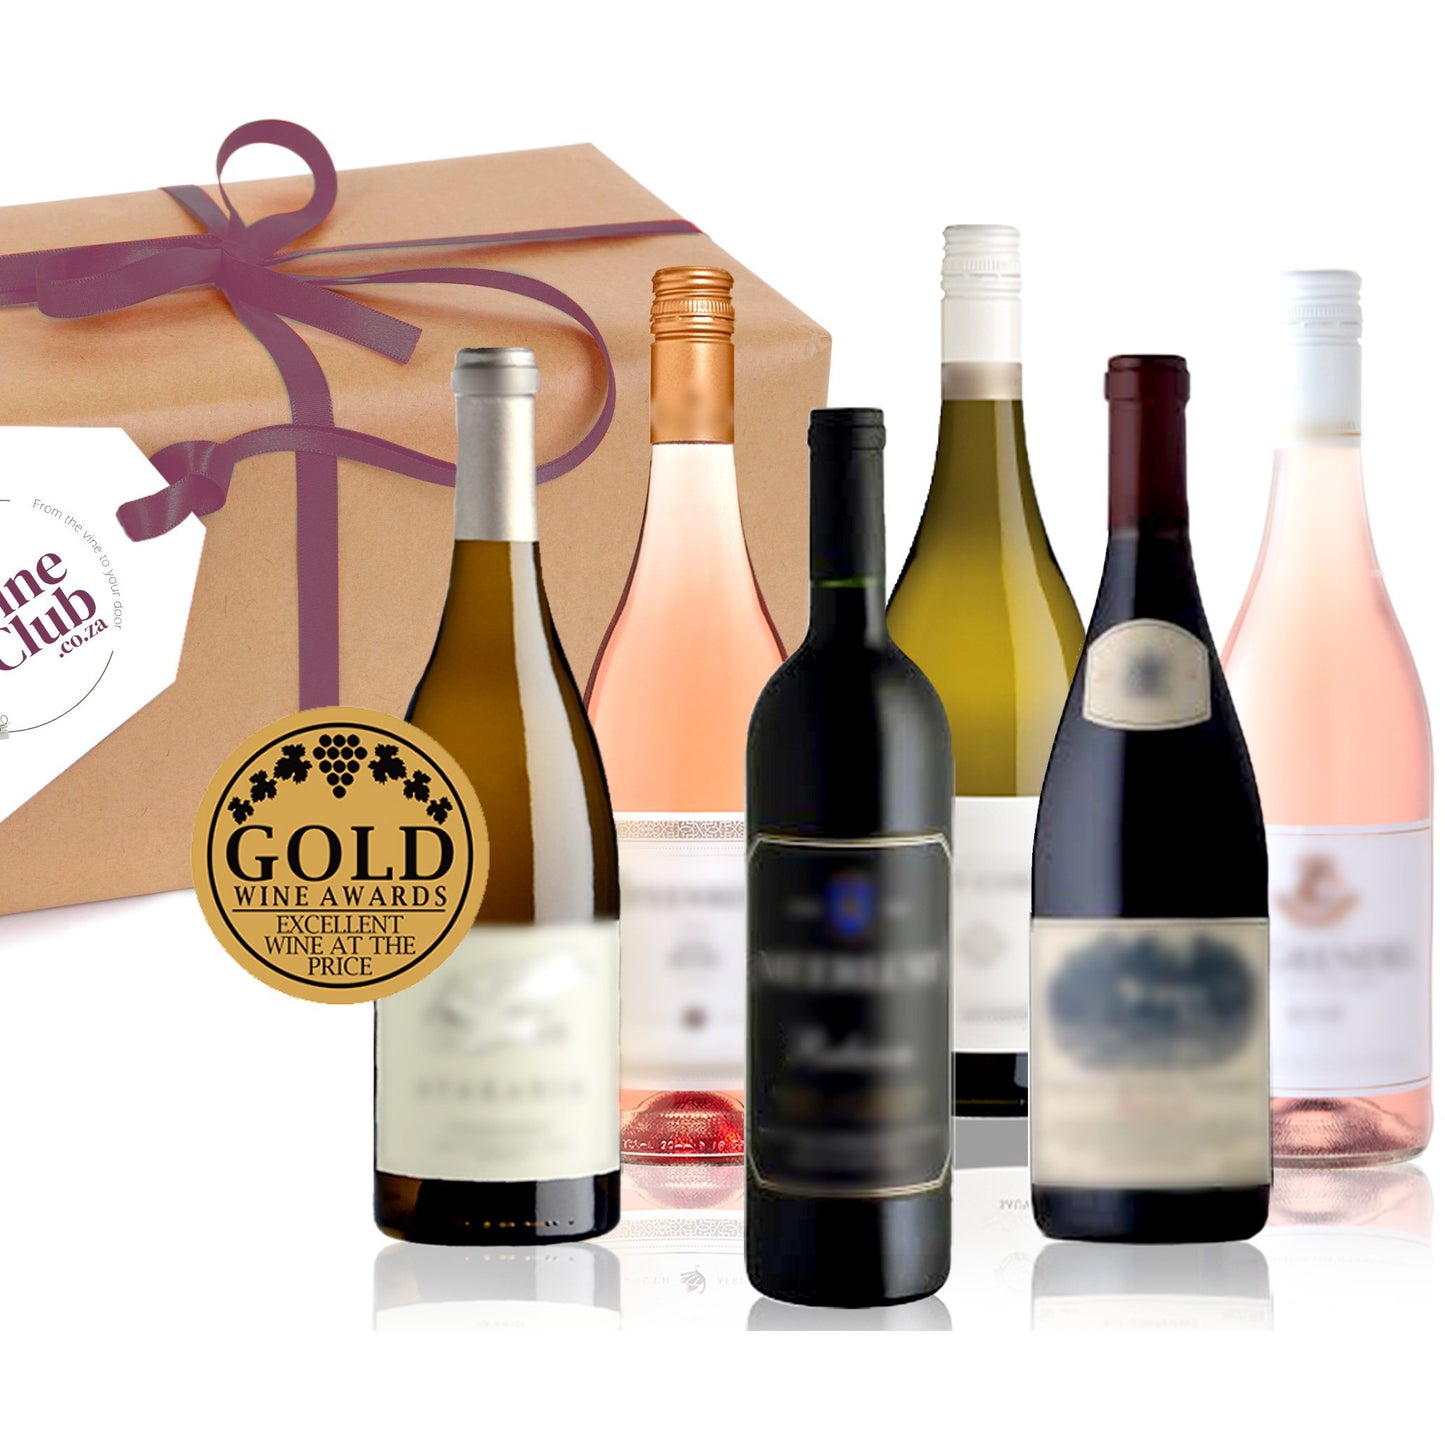 Bronze Monthly Mixed Wine Box R499 Per month